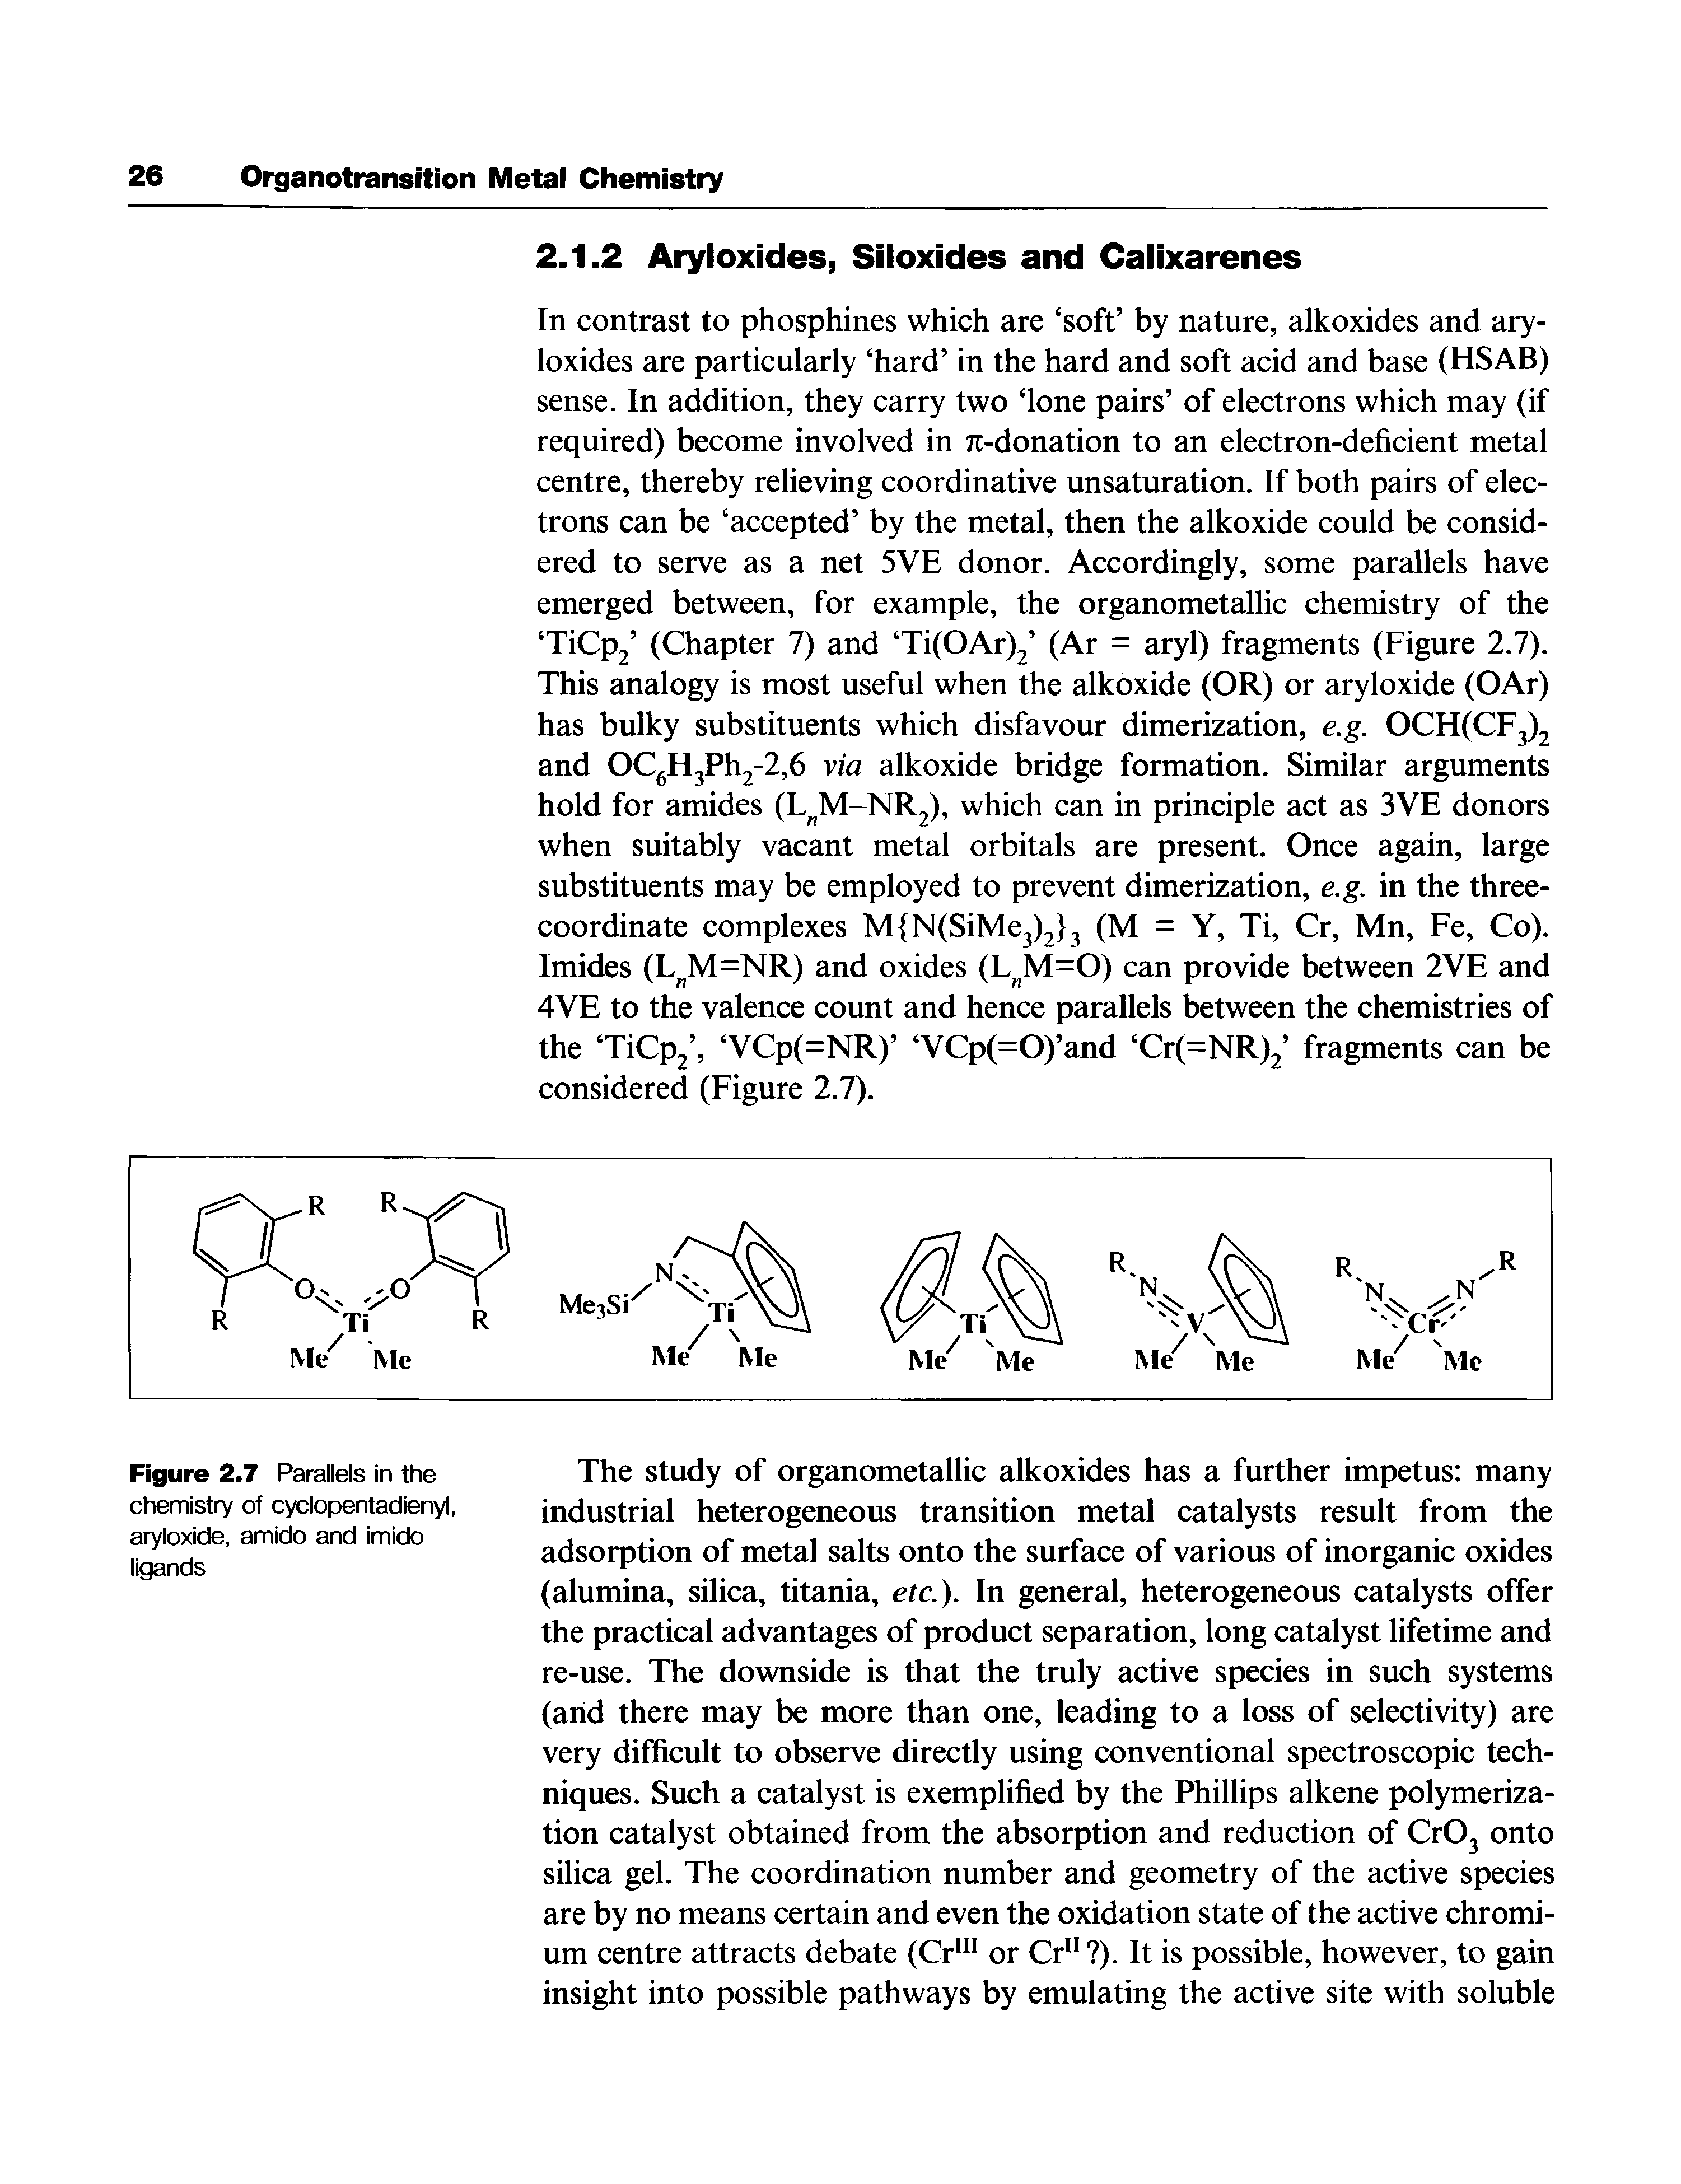 Figure 2.7 Parallels in the chemistry of cyclopentadienyl, aryloxide, amido and imido ligands...